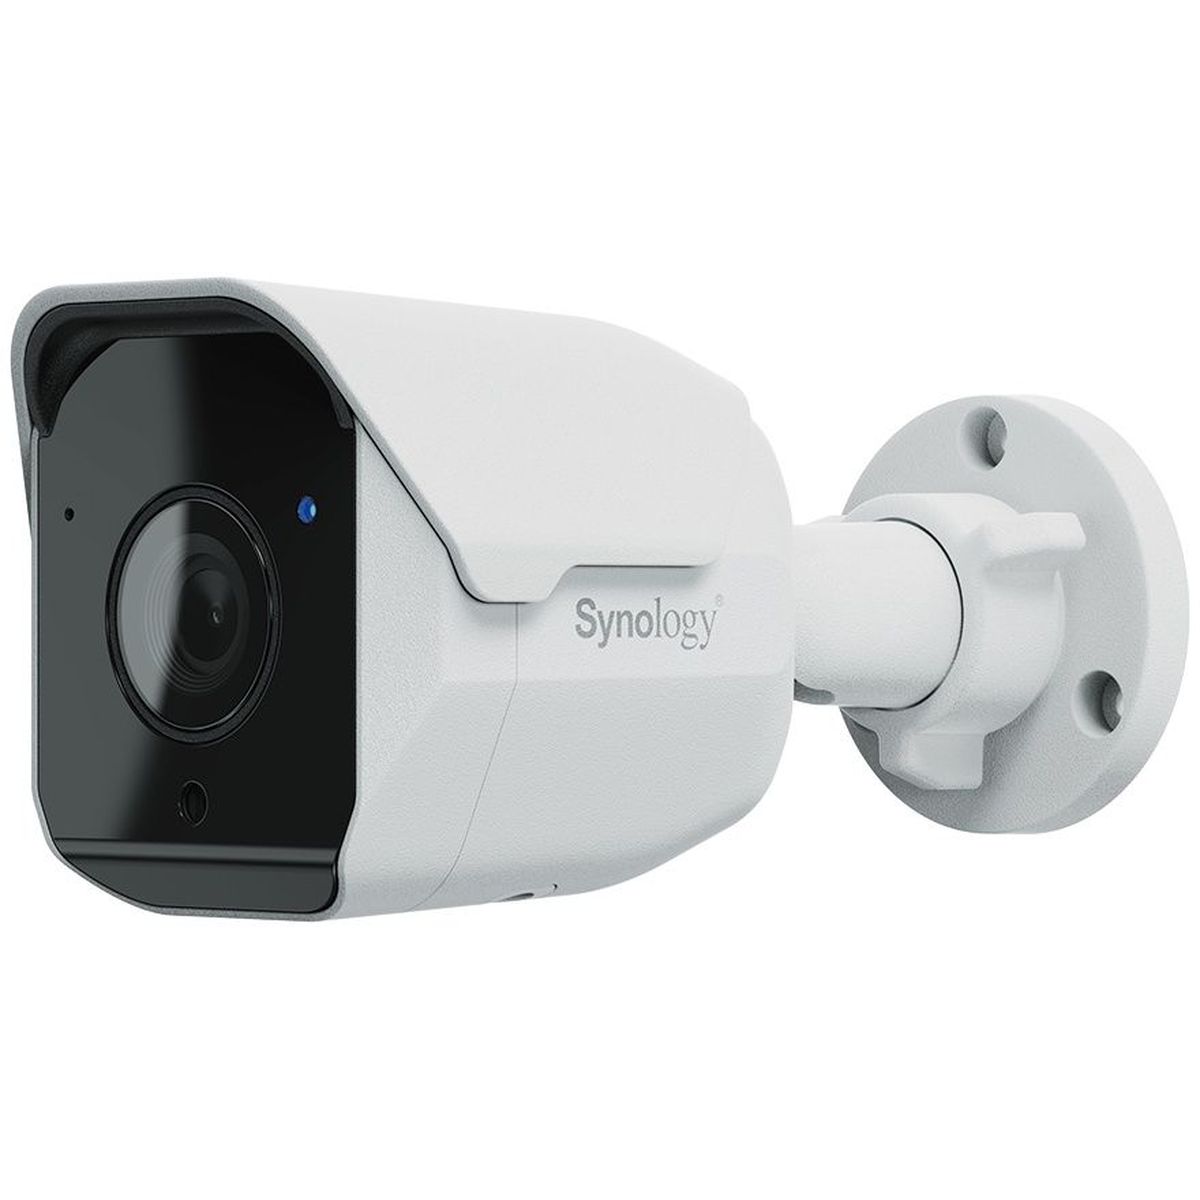 Bullet camera IP67 rated 5MP with 110degree wide view no license required